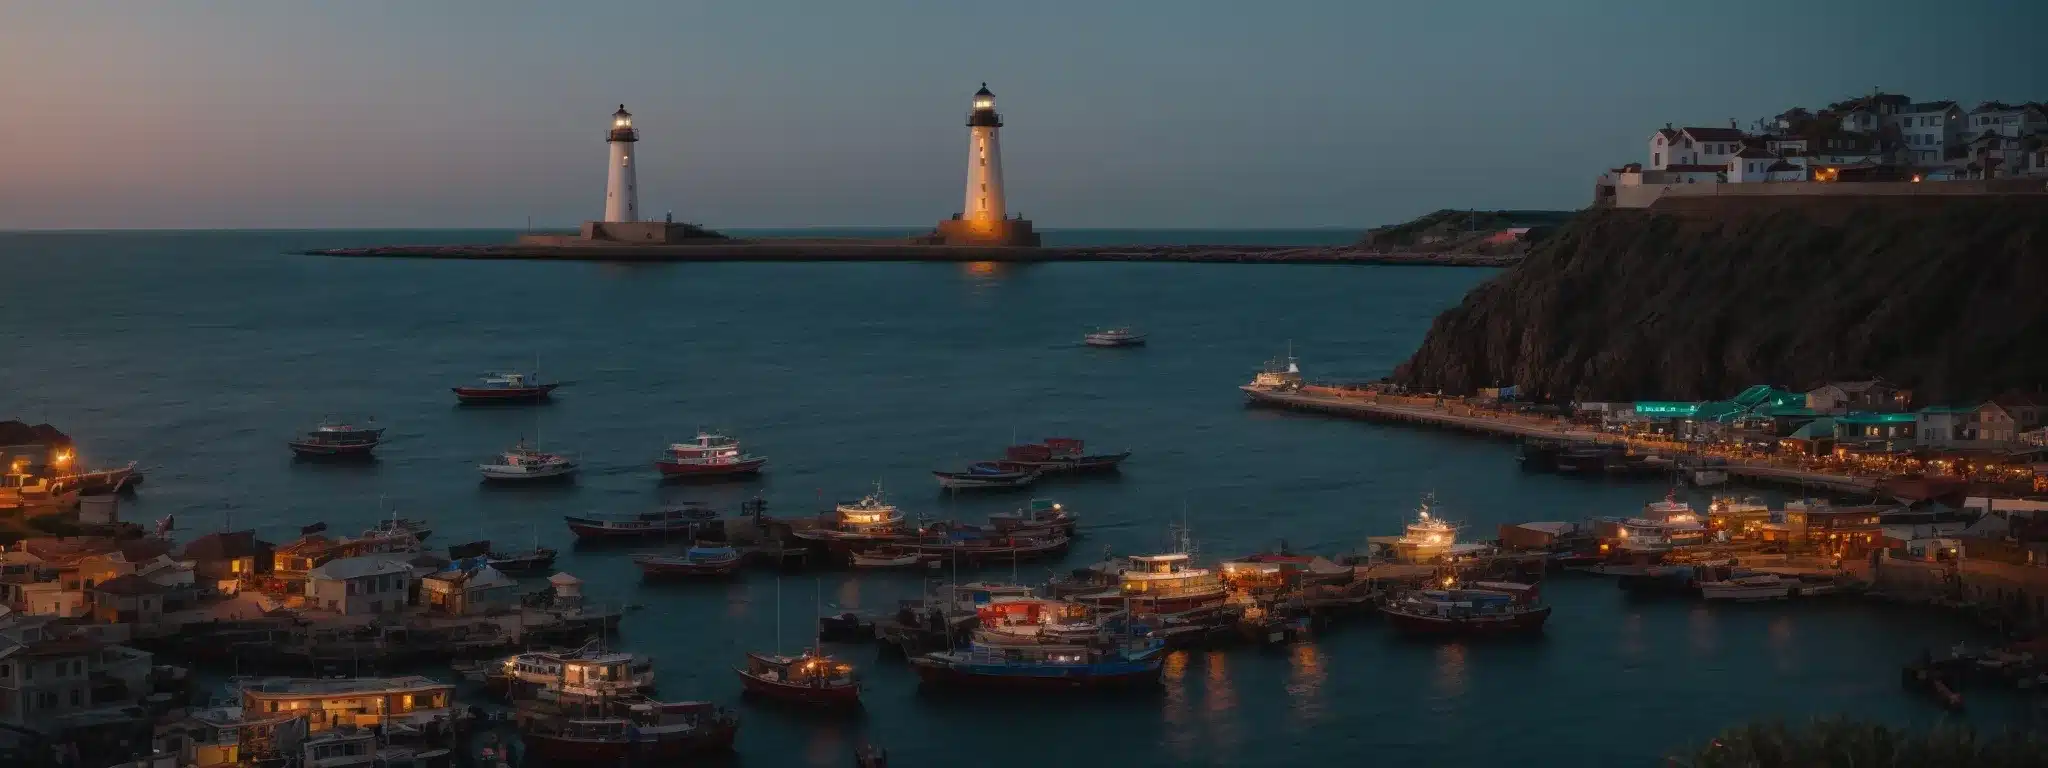 A Lighthouse Stands Majestically At Dusk, Overlooking A Sea Bustling With Colorful Market Boats, As Ships Navigate Towards The Shining Beacon.